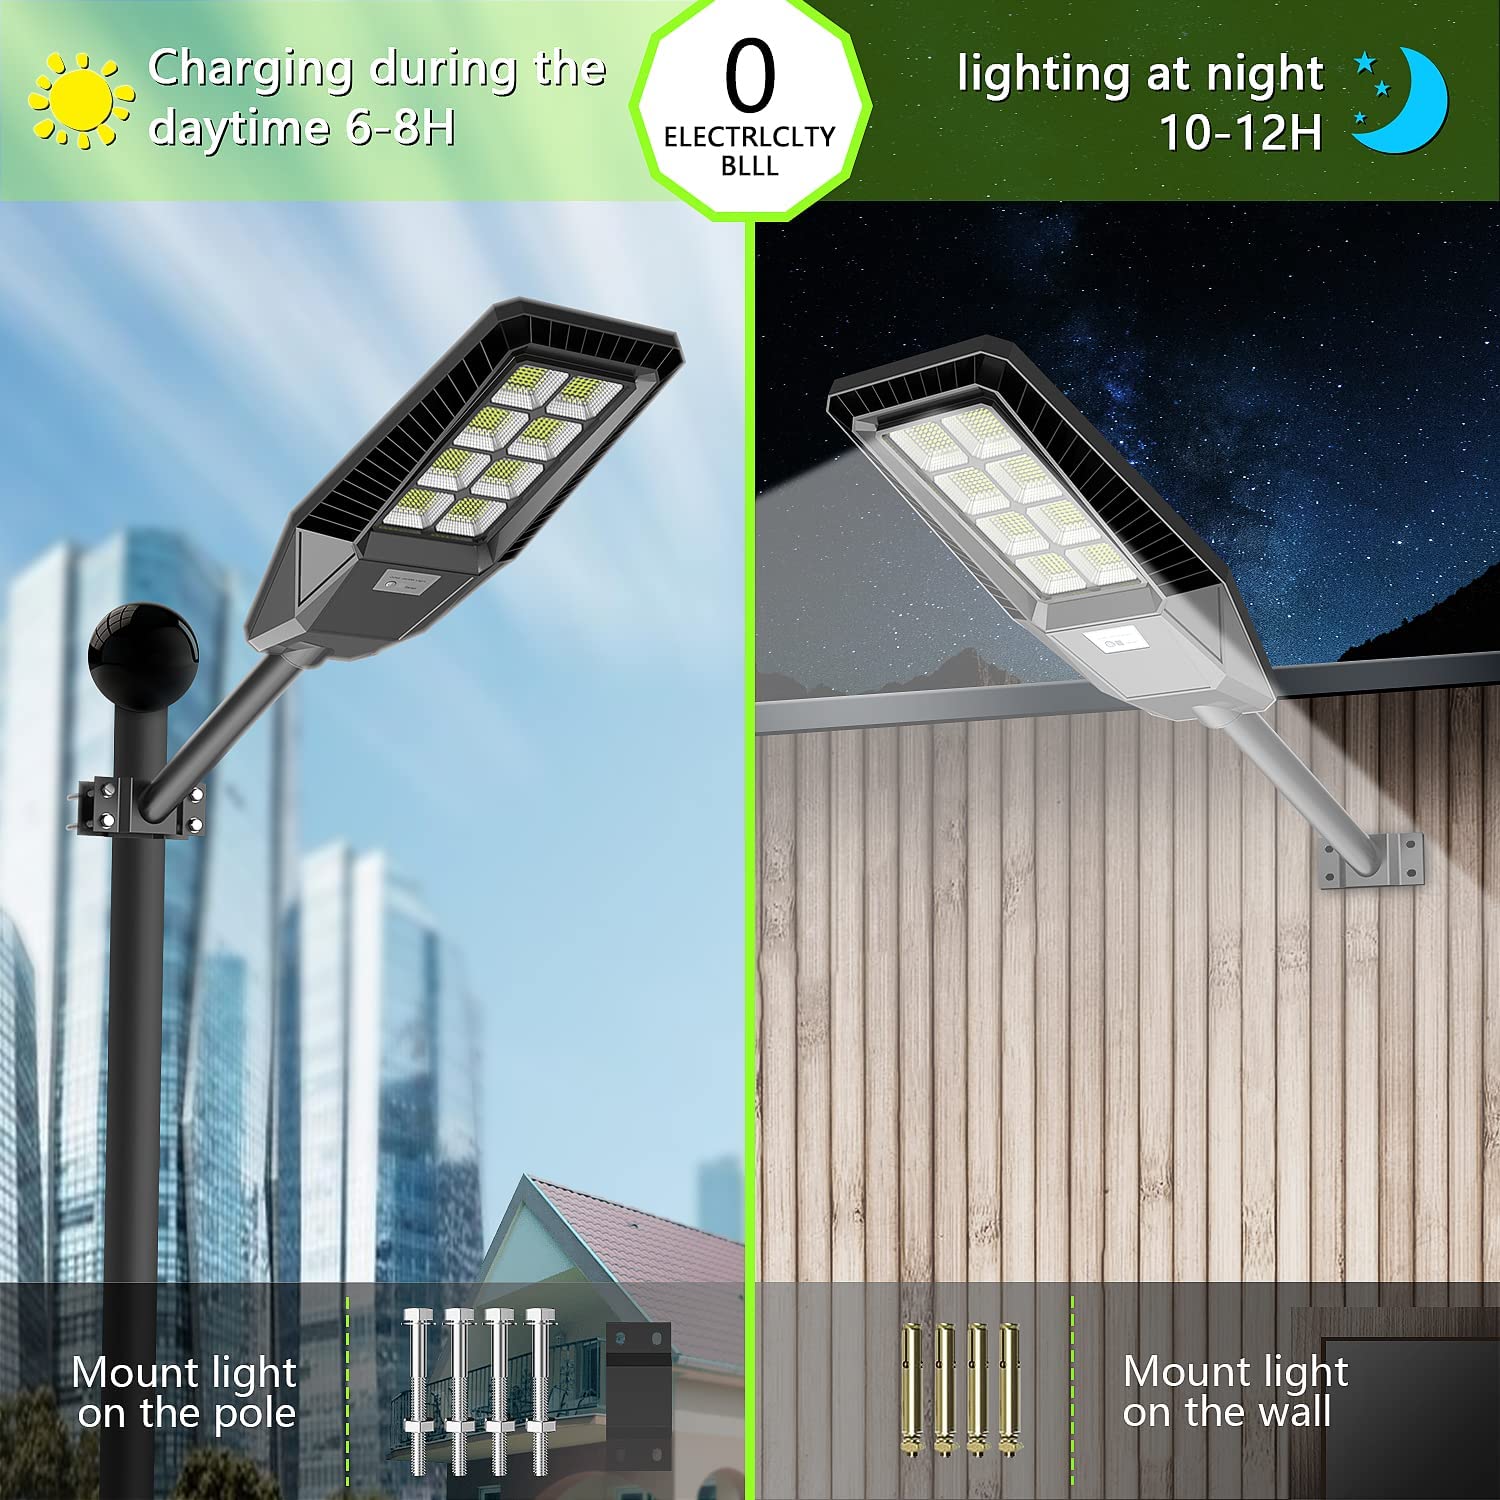 DENGMALL 400W LED Solar Street Lights Outdoor, Dusk to Dawn Security Flood Light with Remote Control ＆ Pole, Wireless, Waterproof, Perfect for Yard, - 3